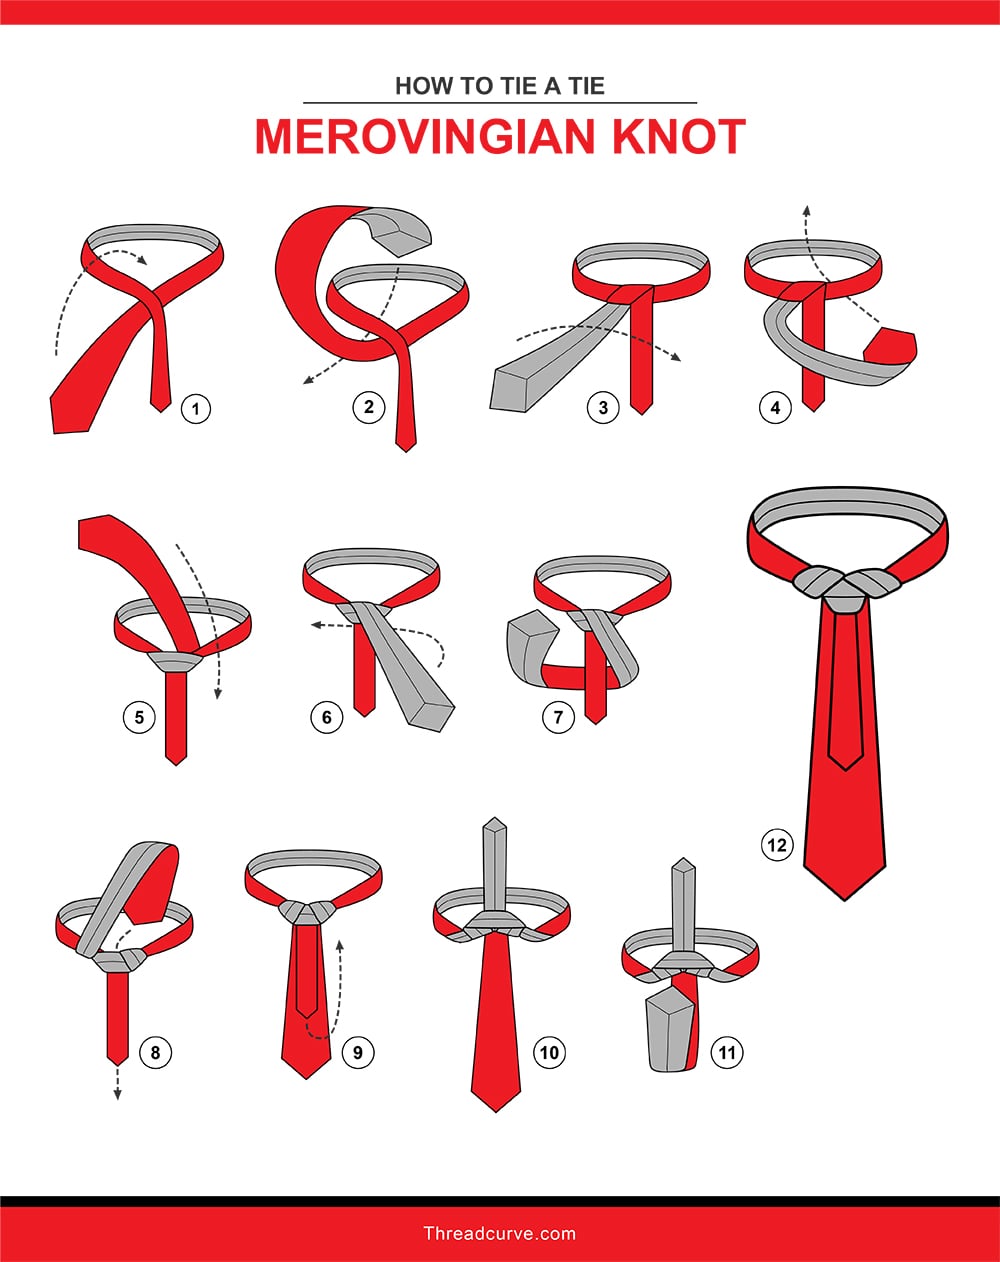 How to tie a Merovingian knot (illustration)